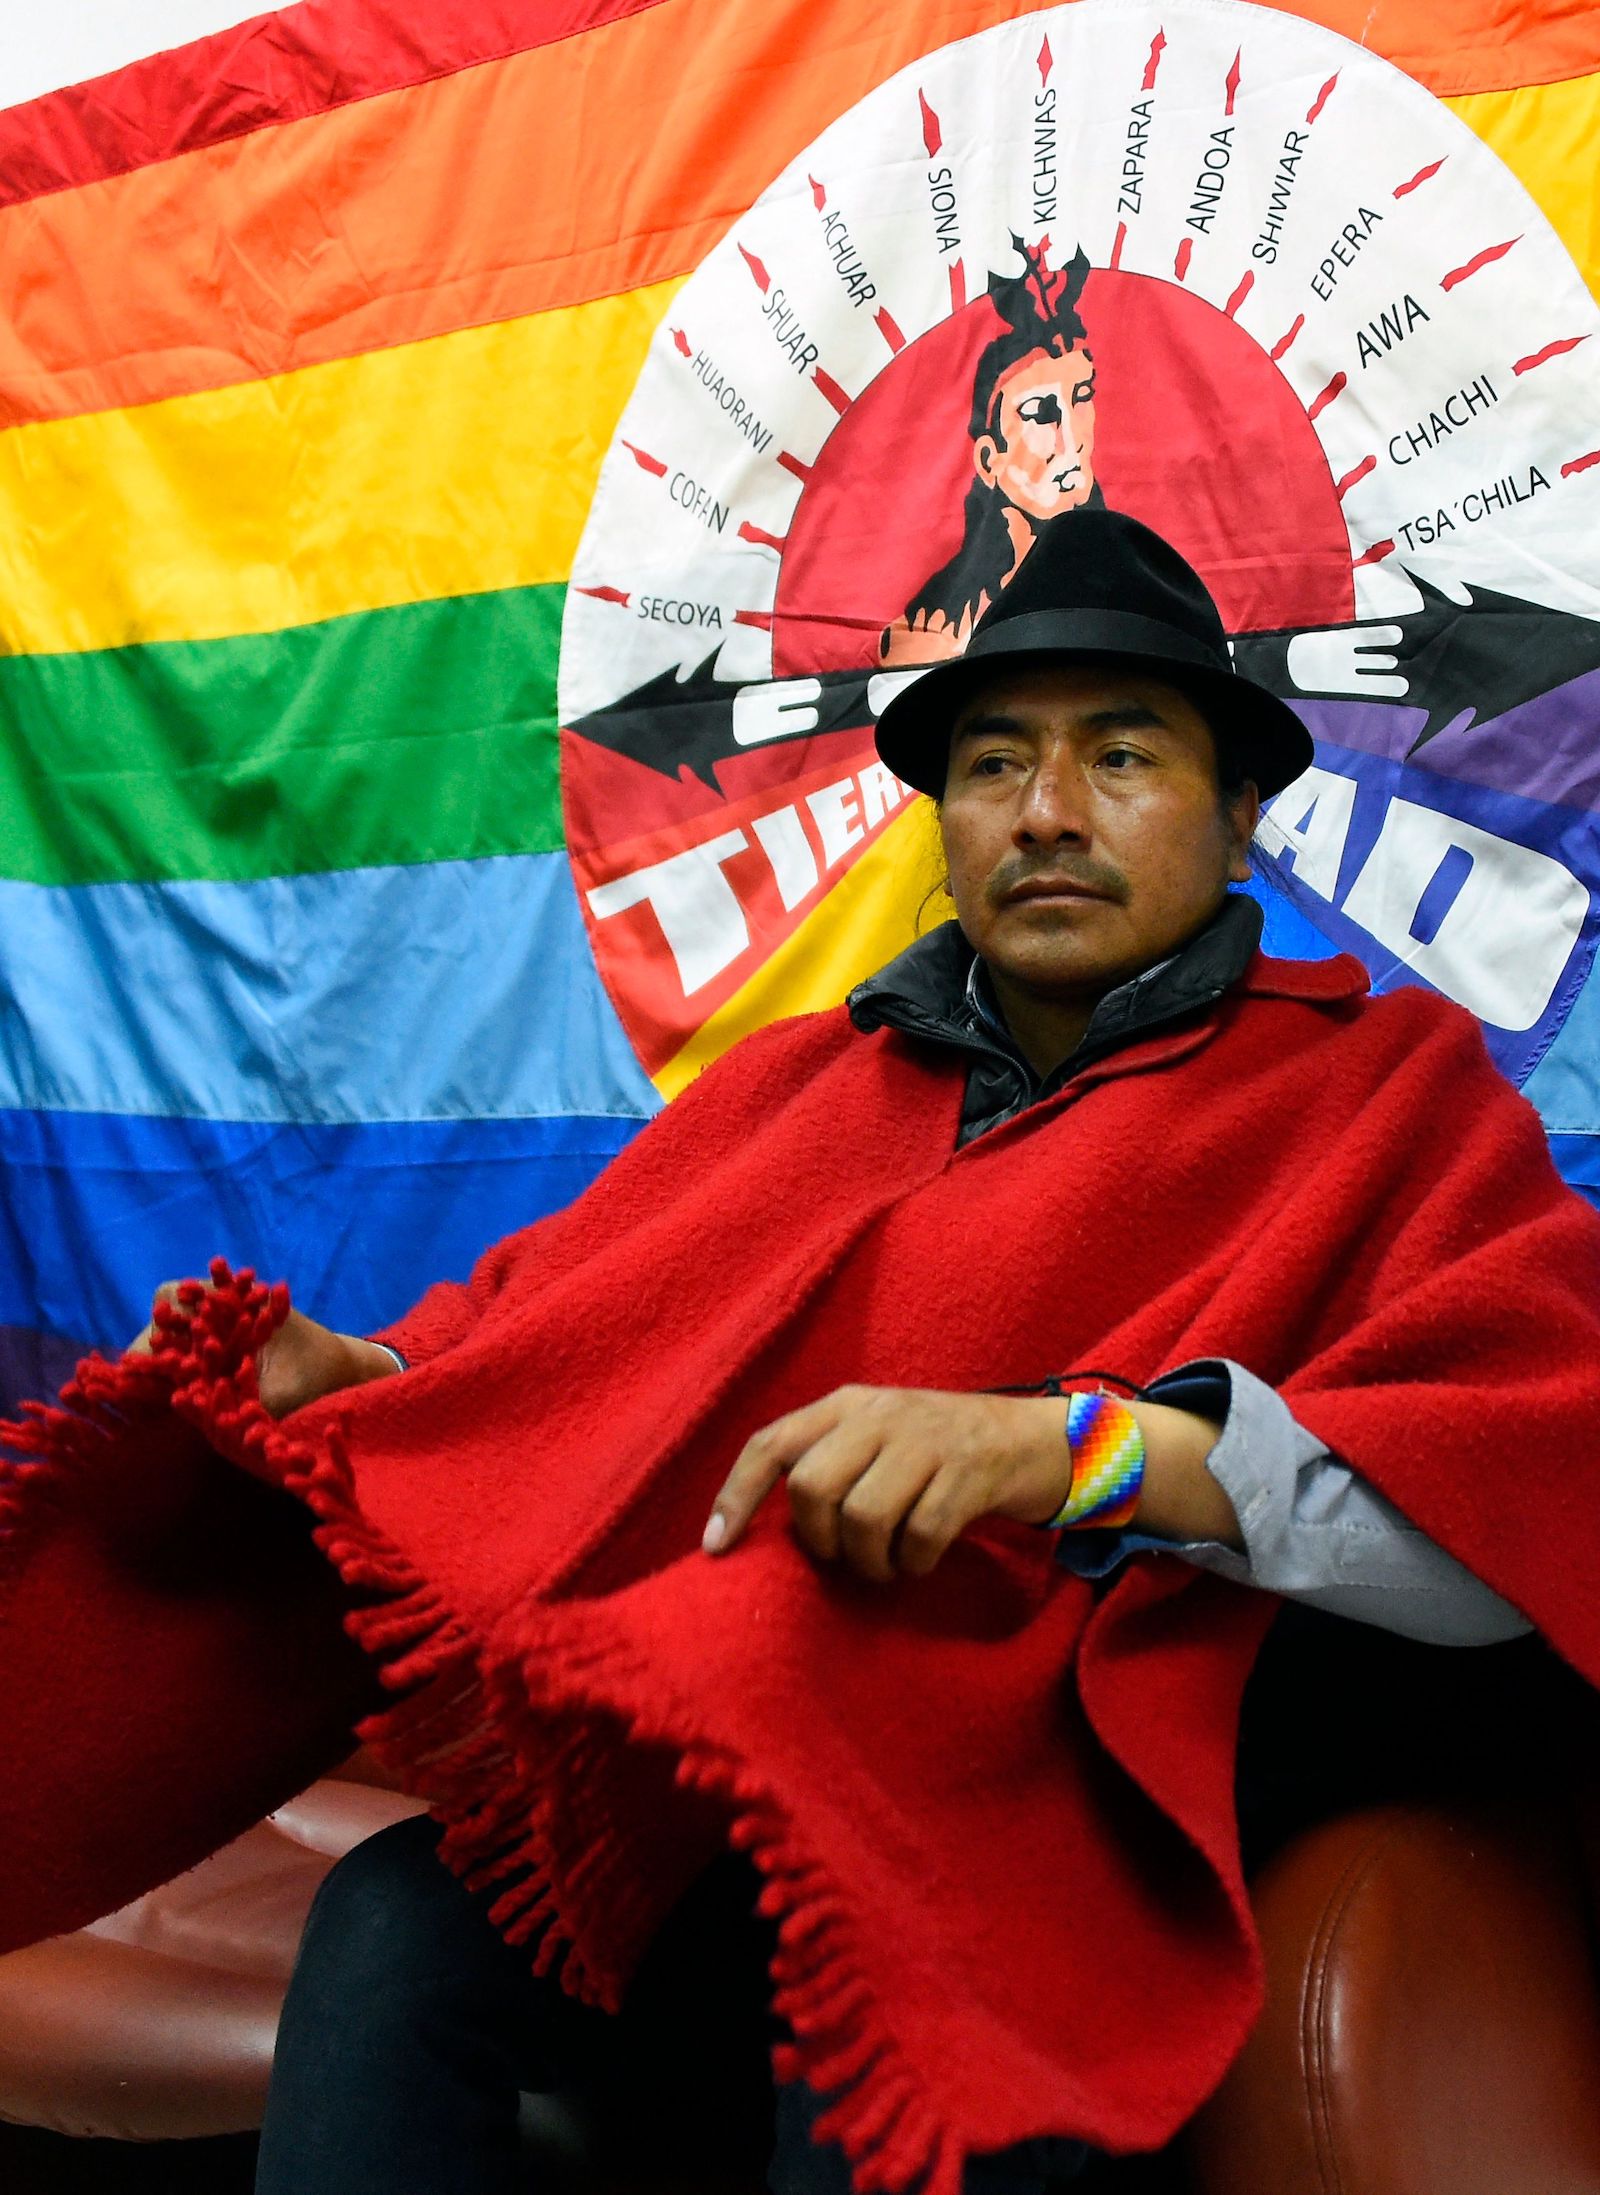 A man wearing red and a black hat sits in front of a rainbow flag